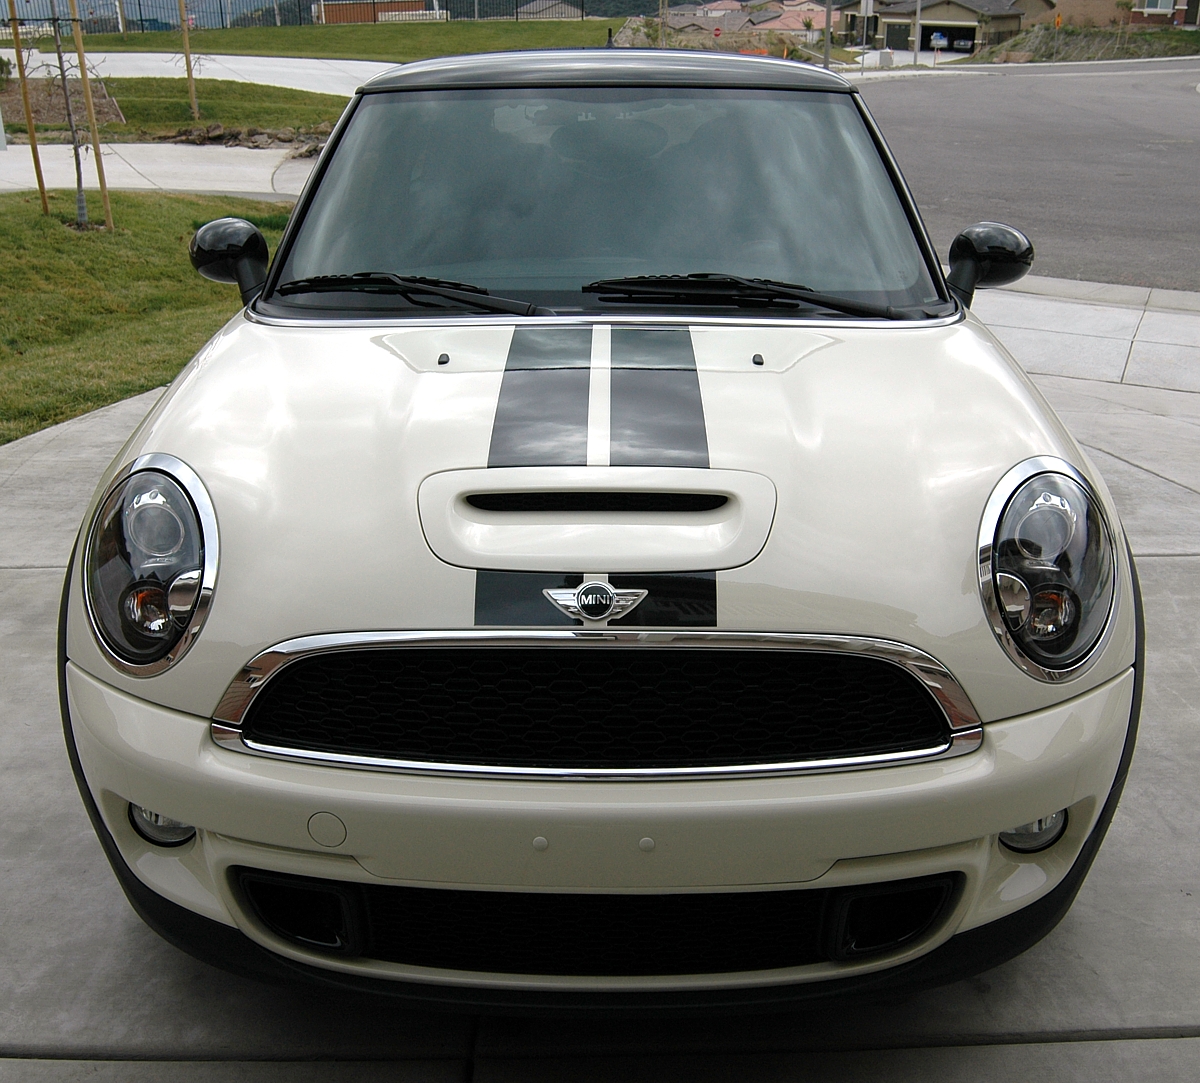 R56 Bonnet stripes on your boot? Pics please - North American Motoring